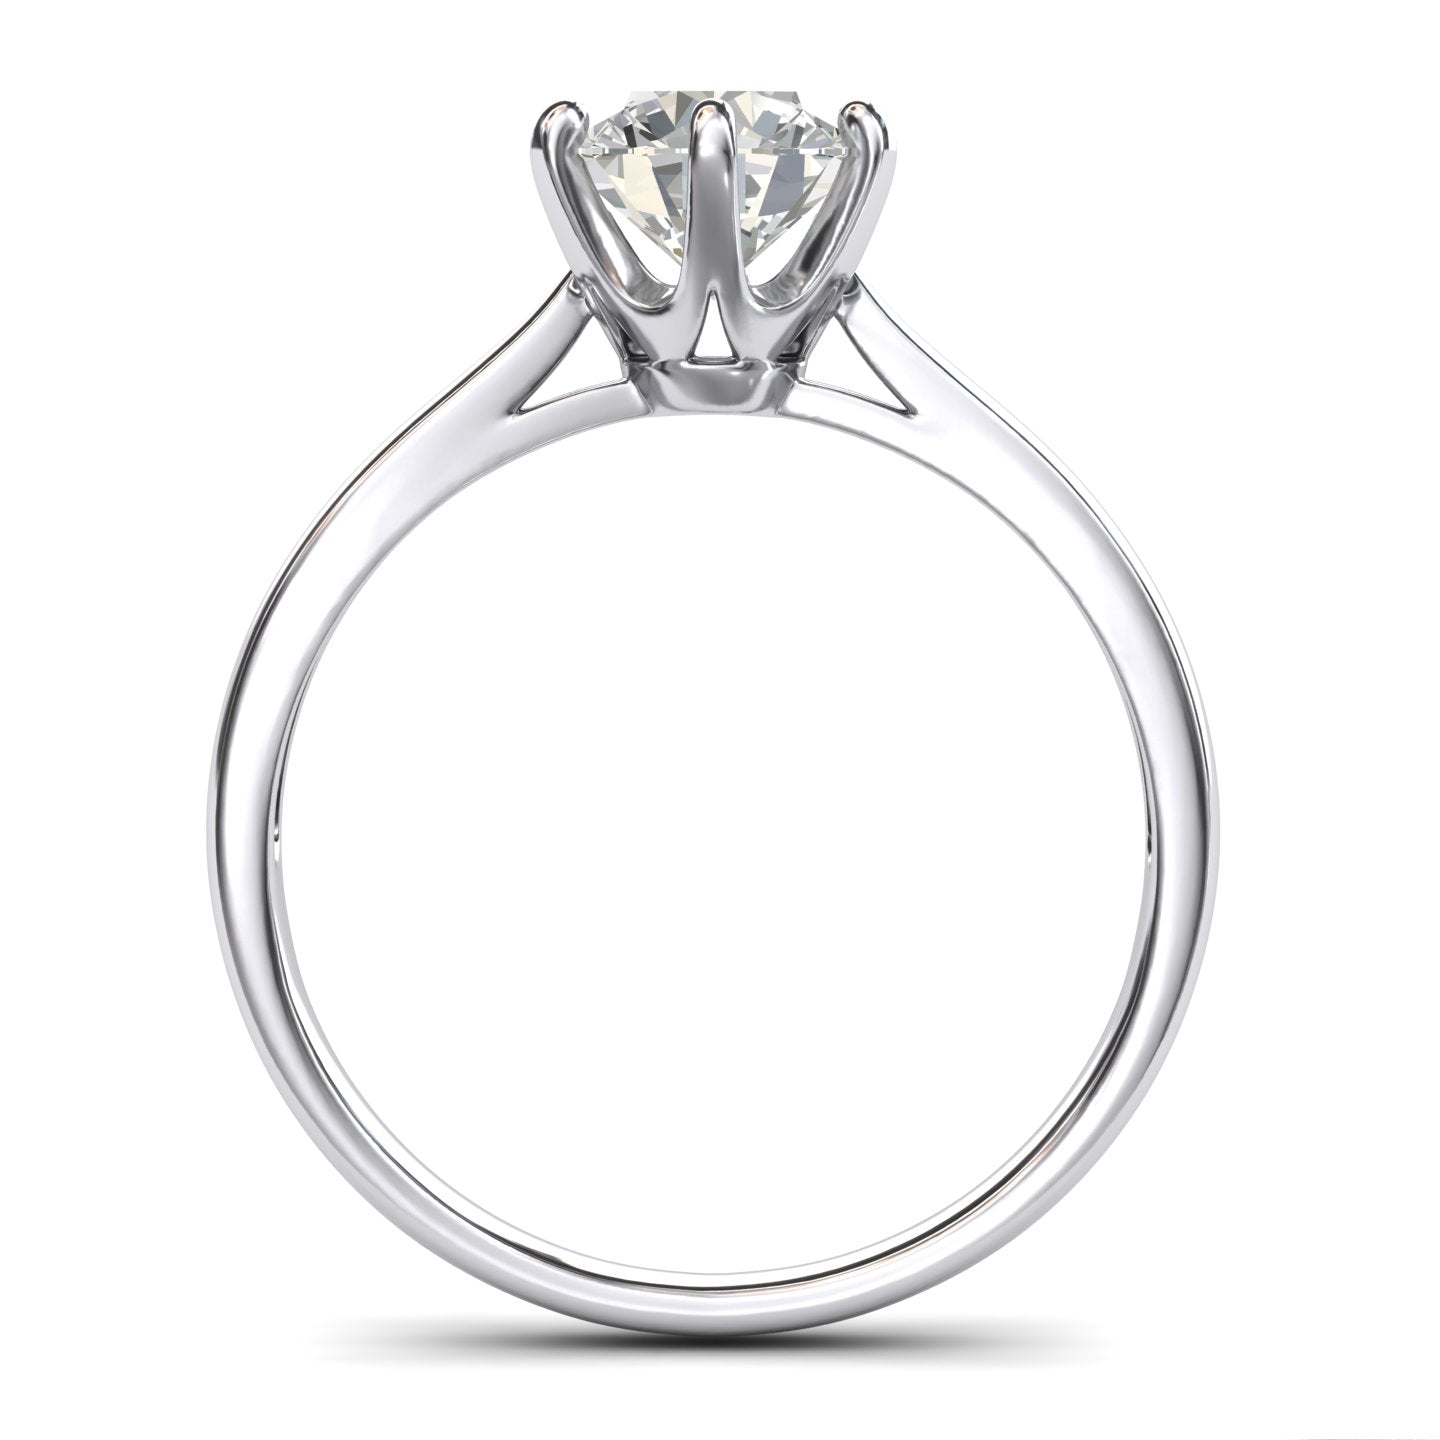 Pure 14k white gold 2.0 CT Classic 6-Prong Solitaire Simulated